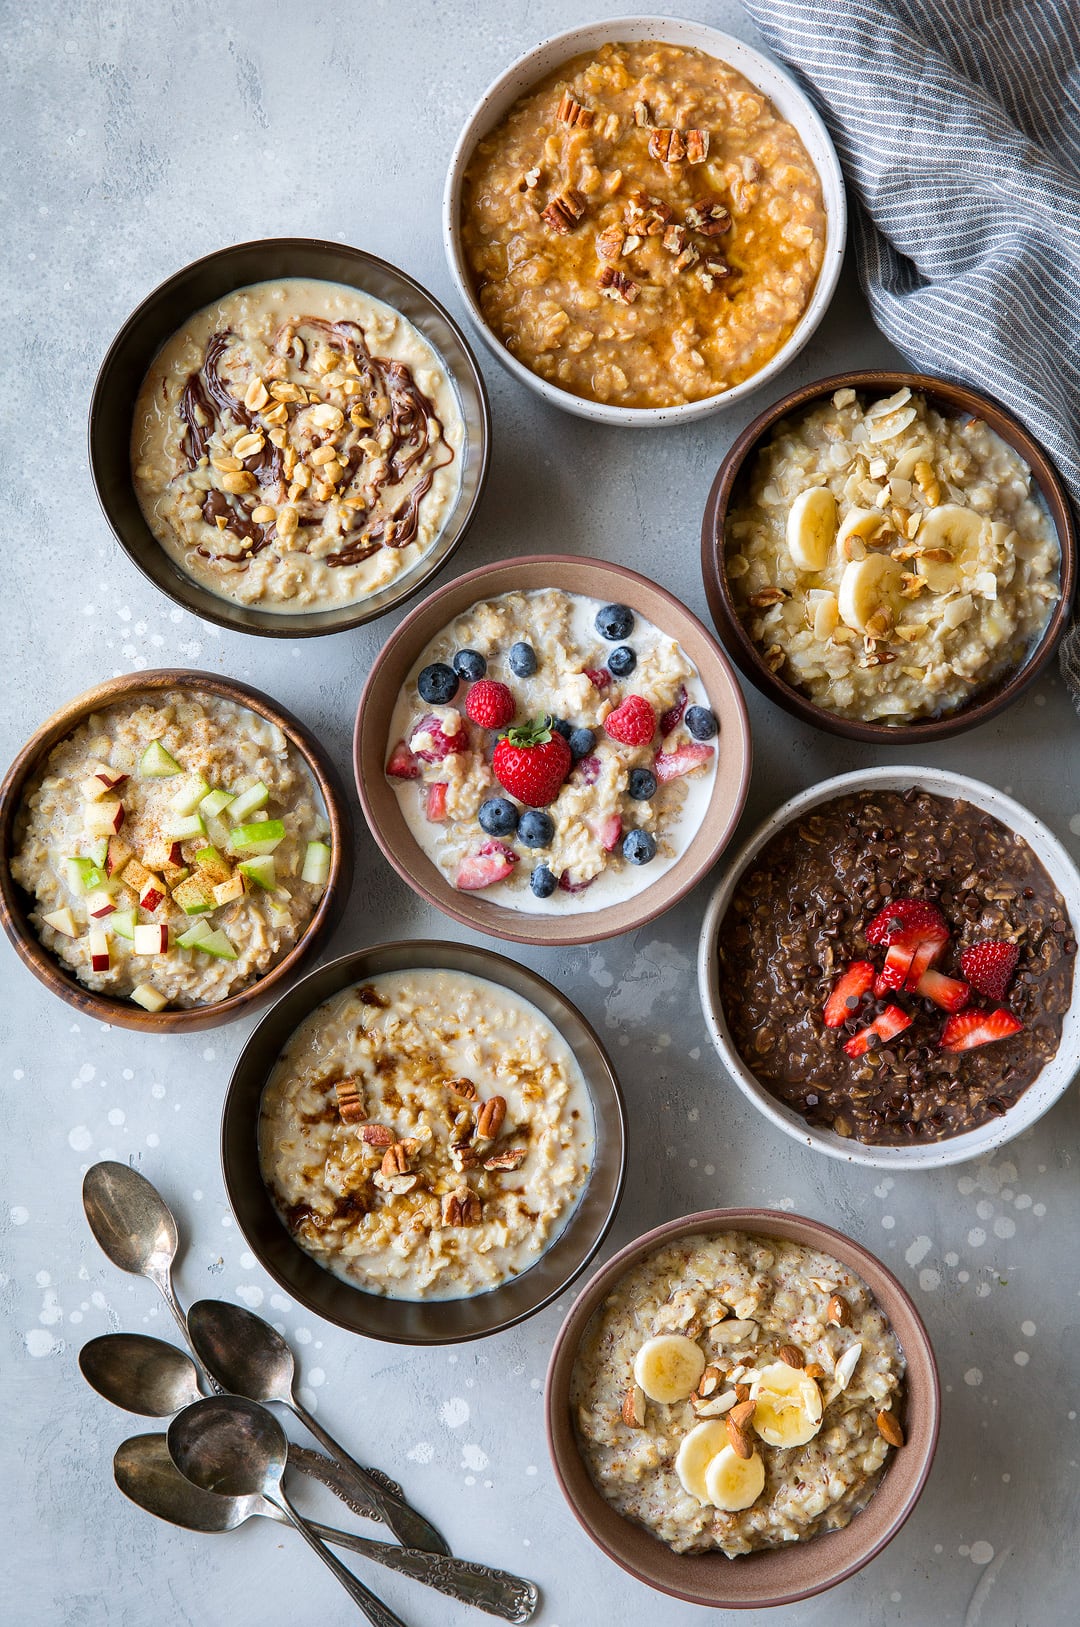 Oatmeal - How to Cook it 8 Delicious Ways! - Cooking Classy